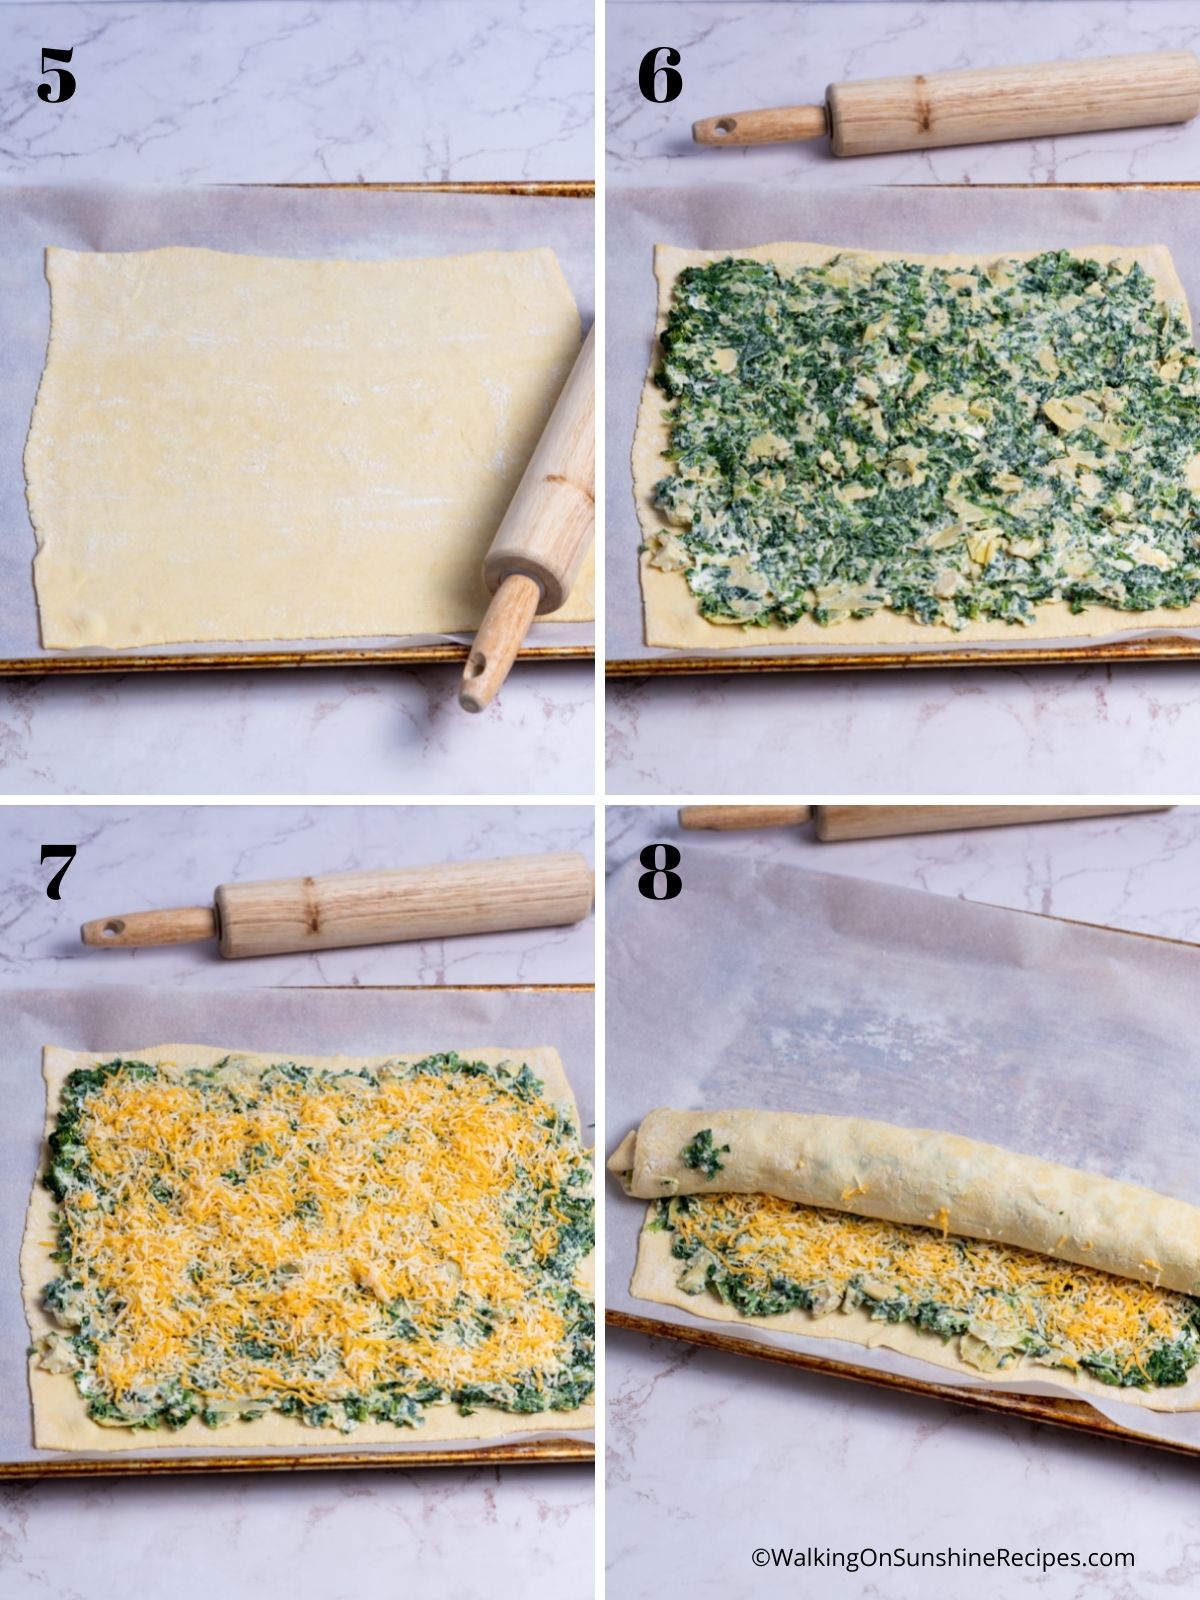 Spread spinach, artichoke mixture on puff pastry.